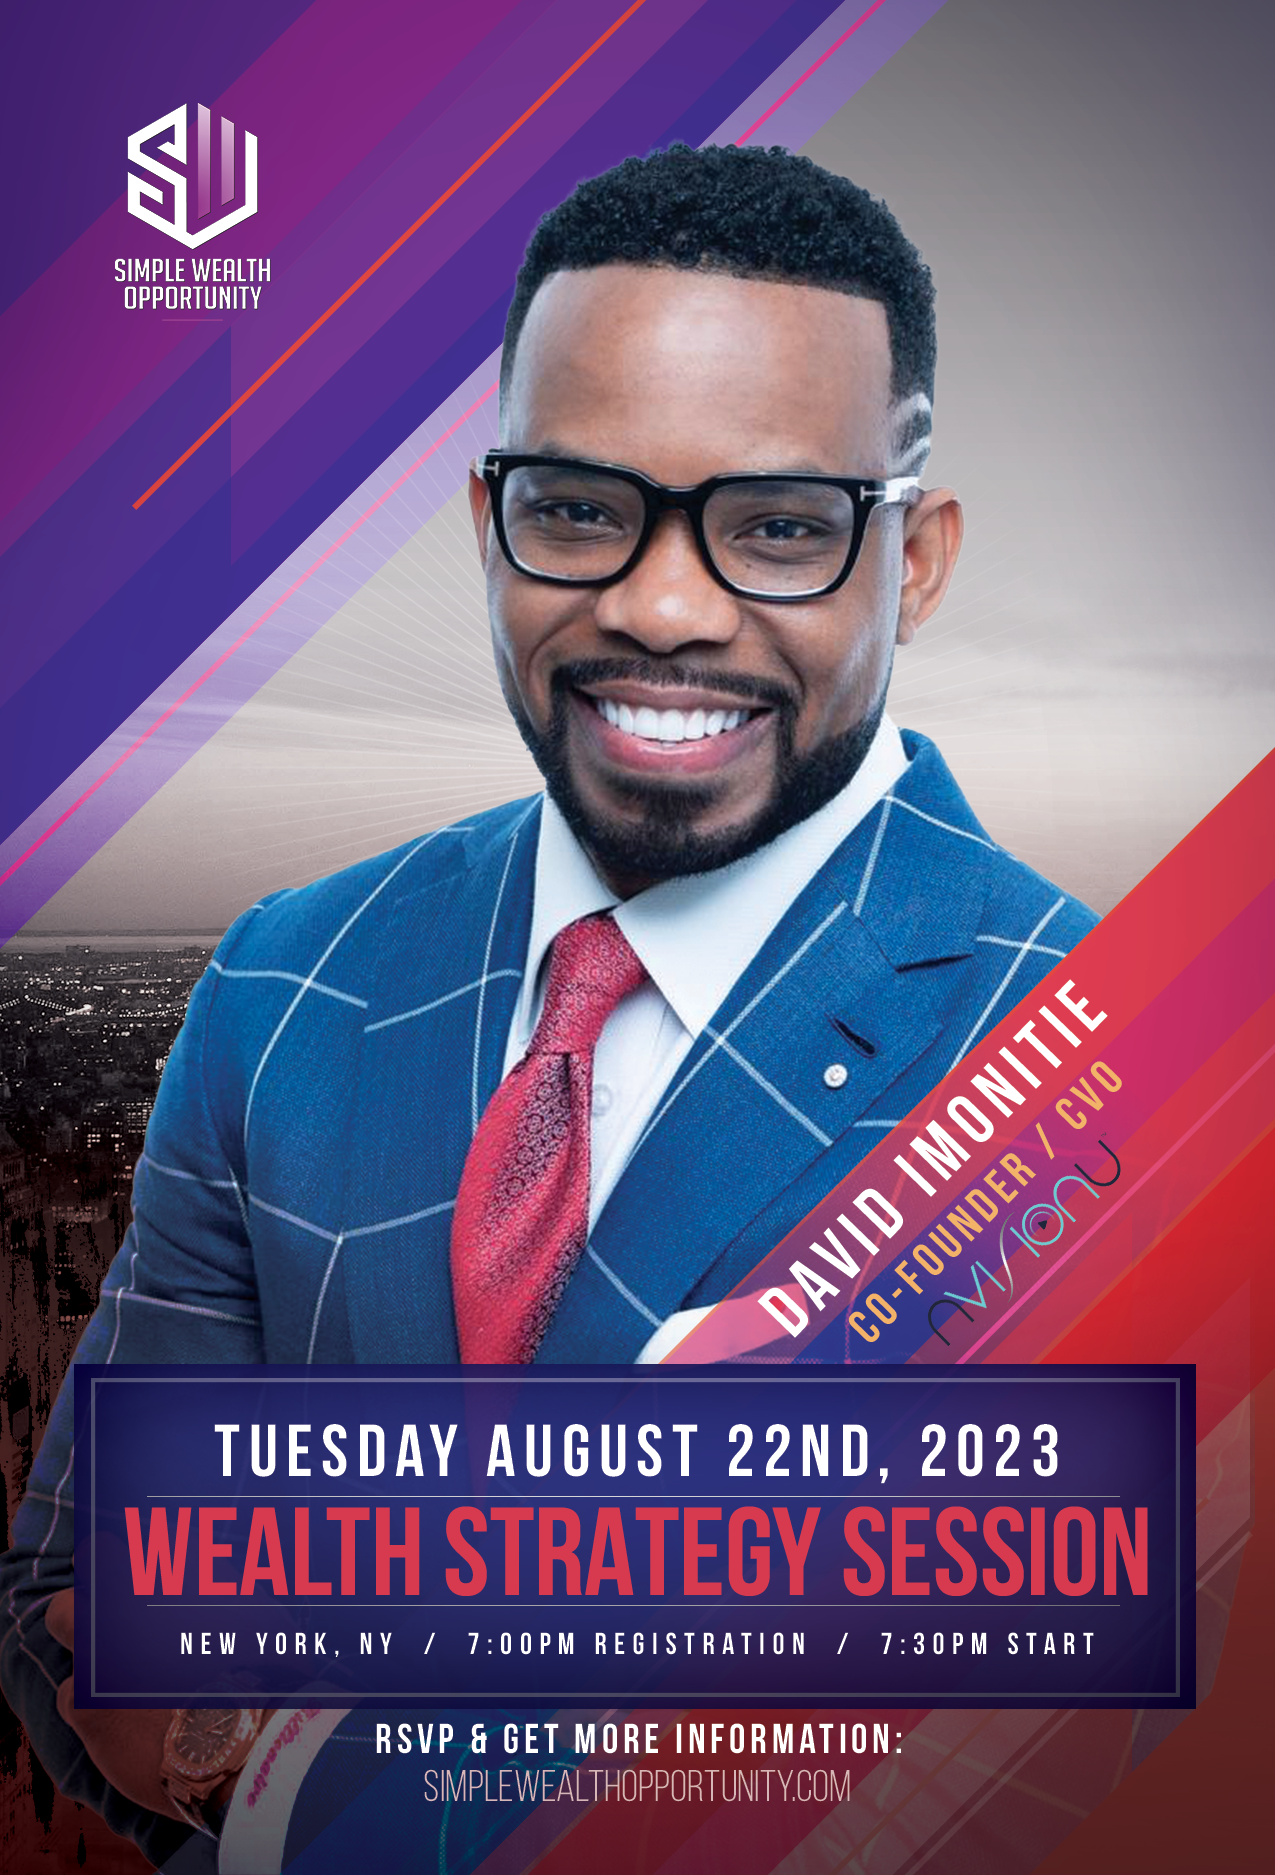 Simple Wealth Opportunity - Jersey City, NJ | WEALTH STRATEGY SESSION WITH MR. DAVID IMONITIE | Tue, Aug 22, 2023 @ 7:00 PM